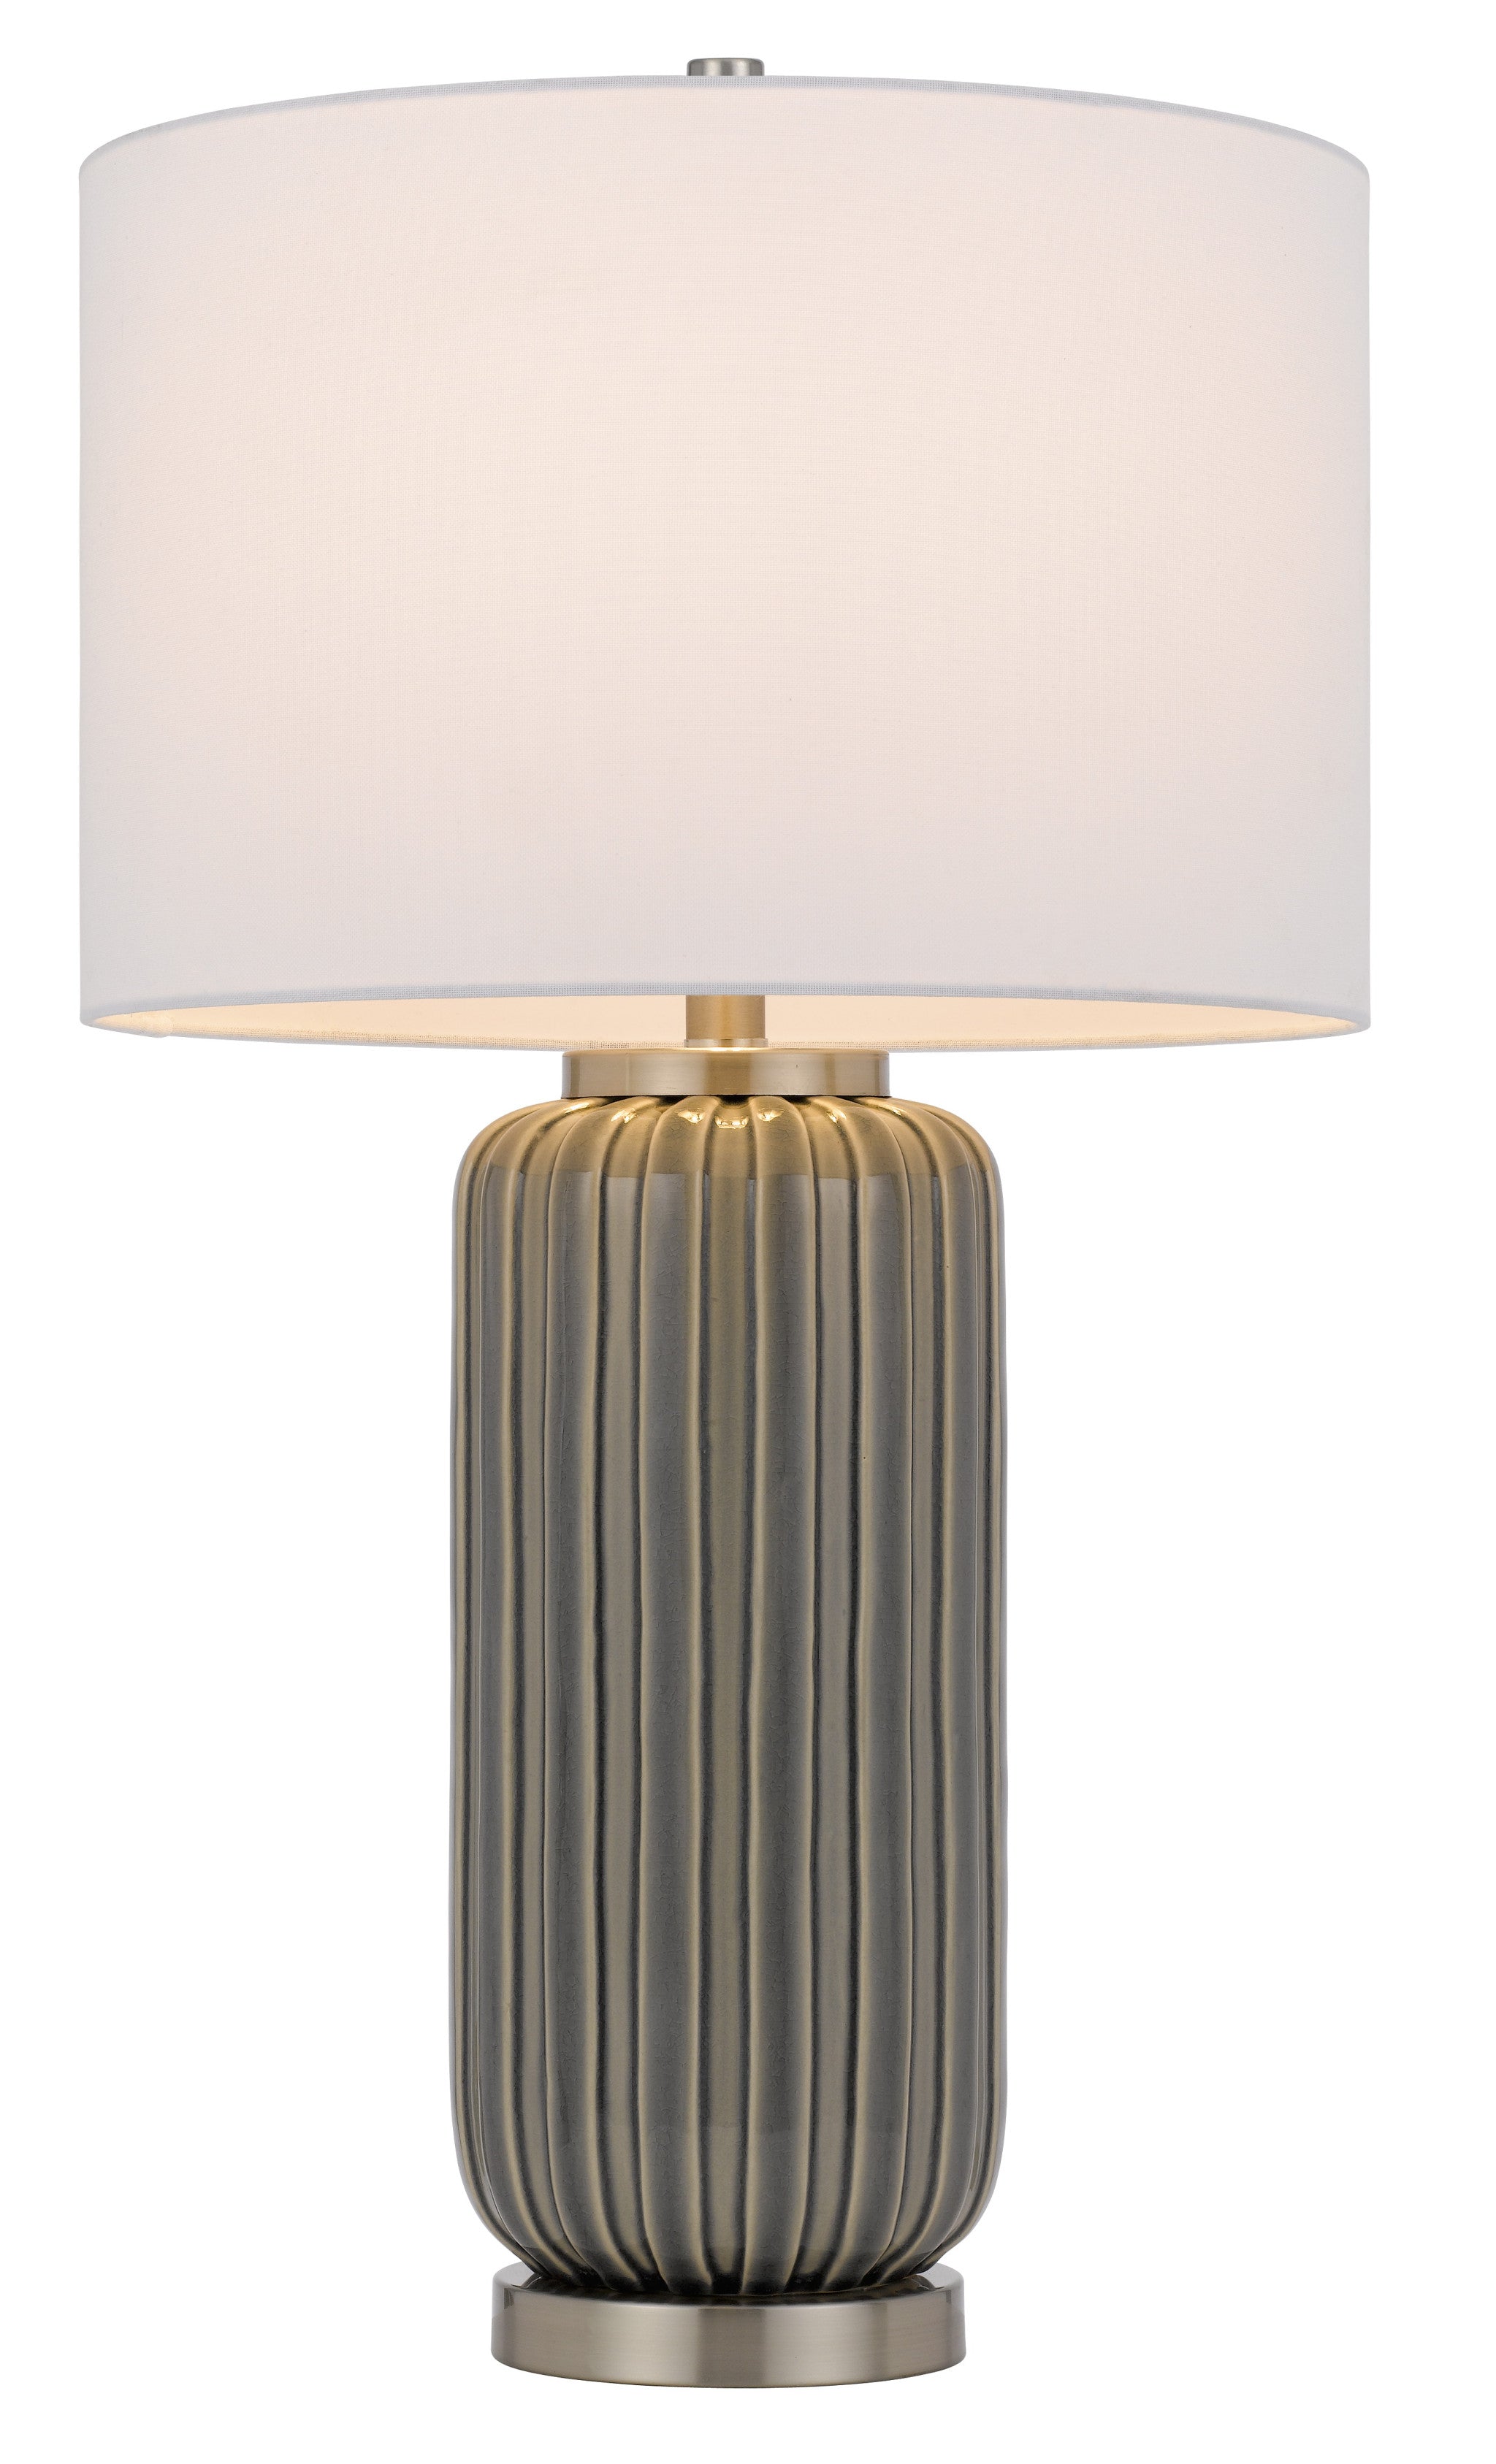 29" Taupe Metal Table Lamp With White Drum Shade